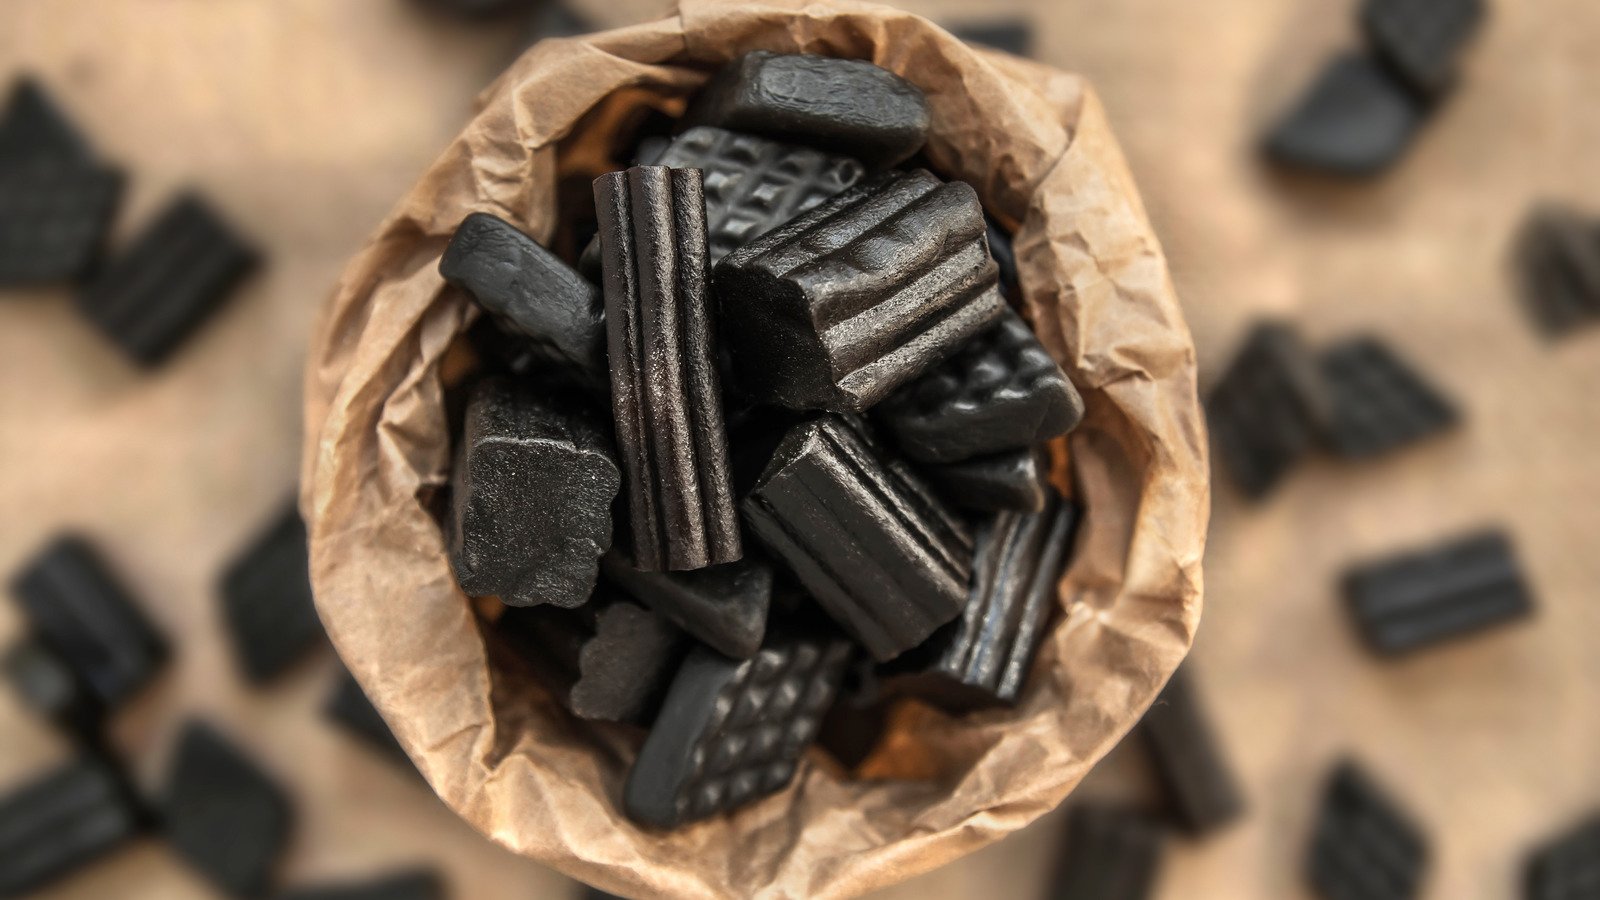 Why Eating Black Licorice Is Riskier Than You Think